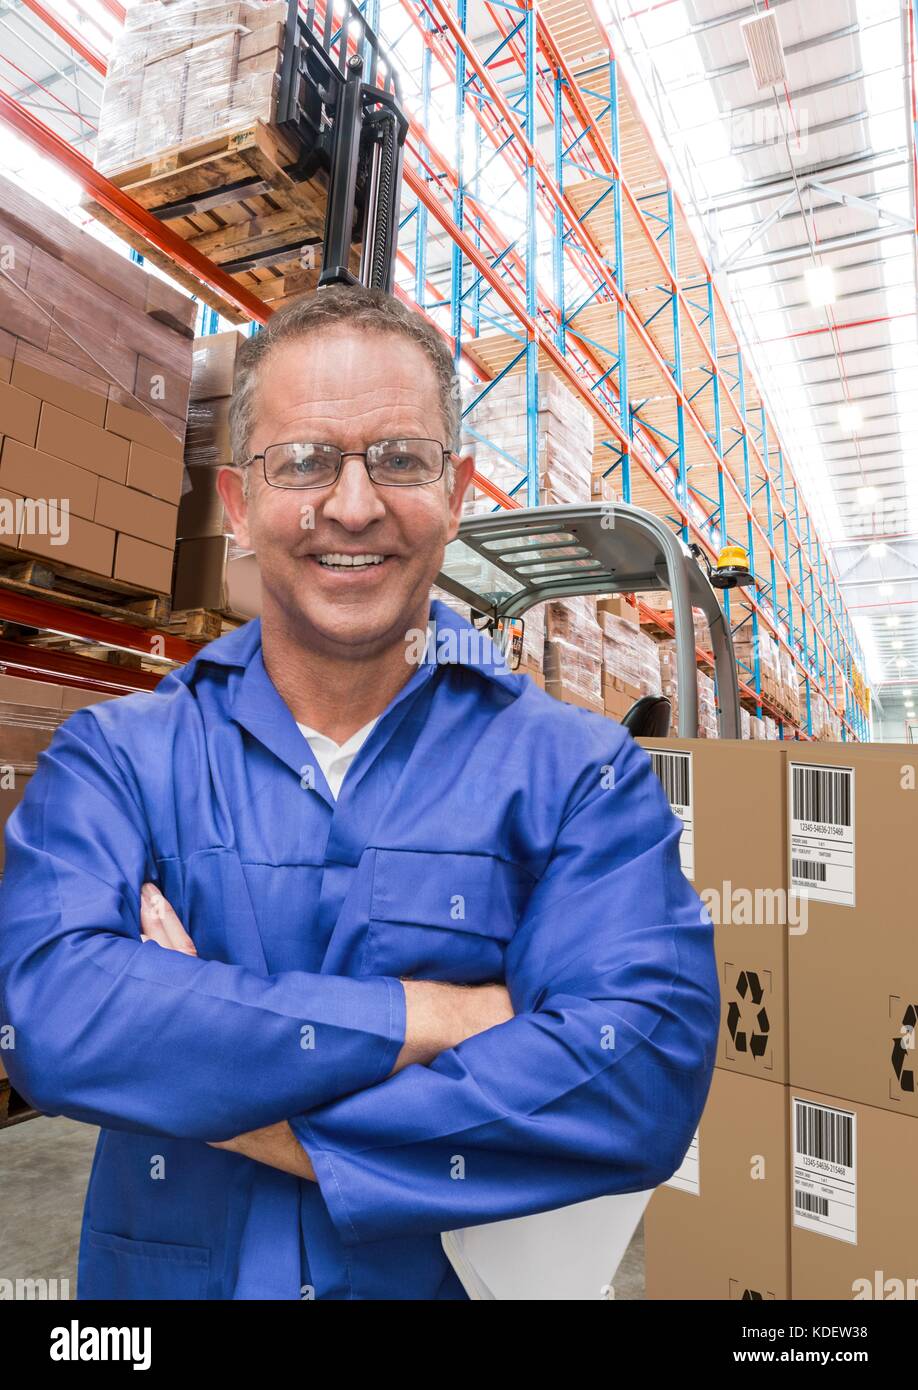 Digital composite of man with boxes in warehouse Stock Photo